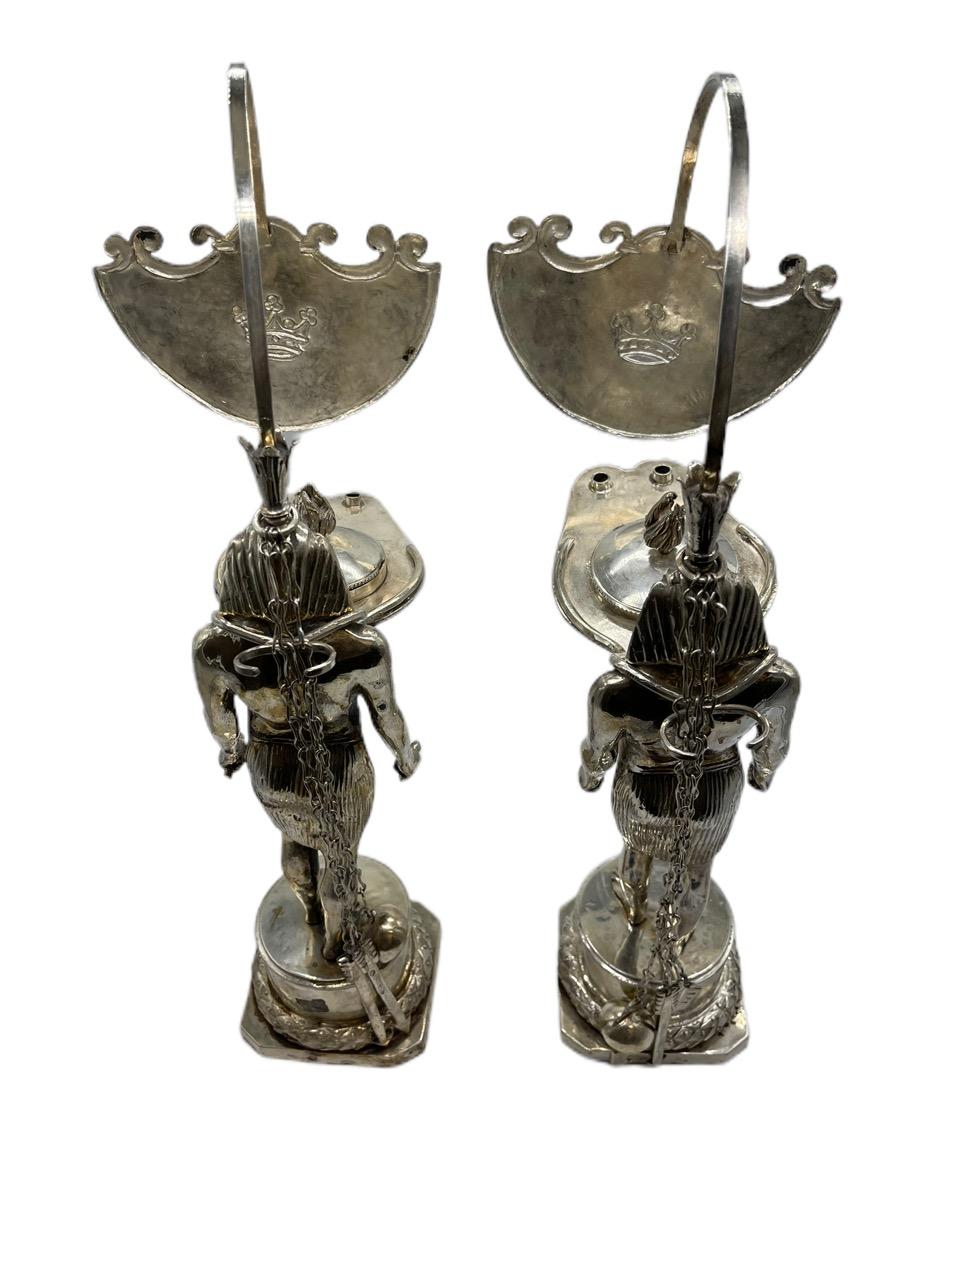 Pair of Early 19th Century Italian Antique Silver Oil Lamps by Vincenzo Belli II 1